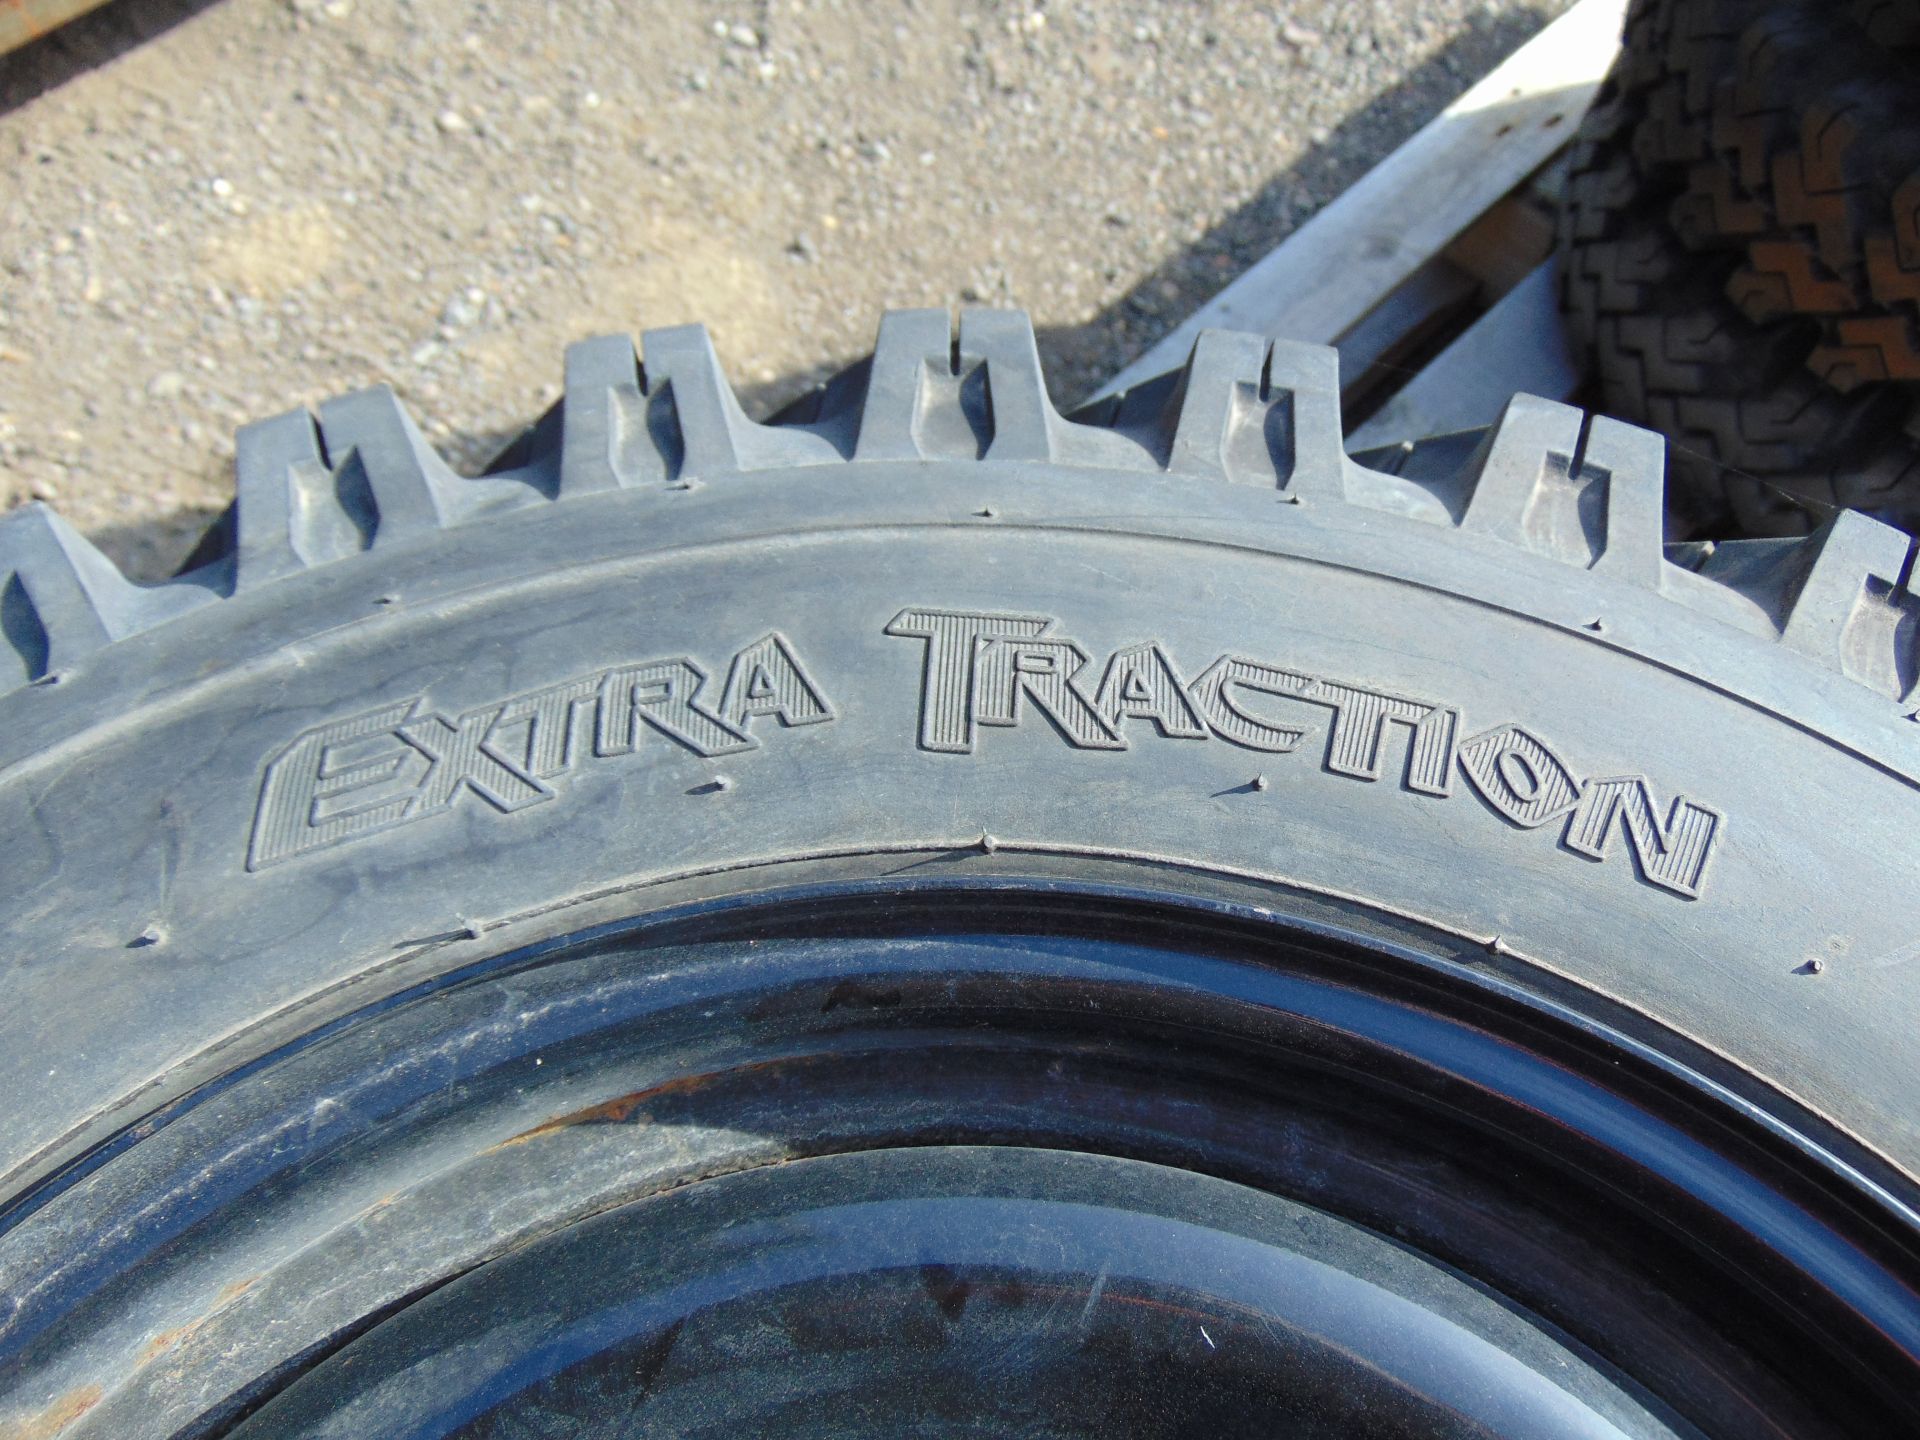 4 x Deestone Extra Traction 6.00-16 Tyres - Image 5 of 7